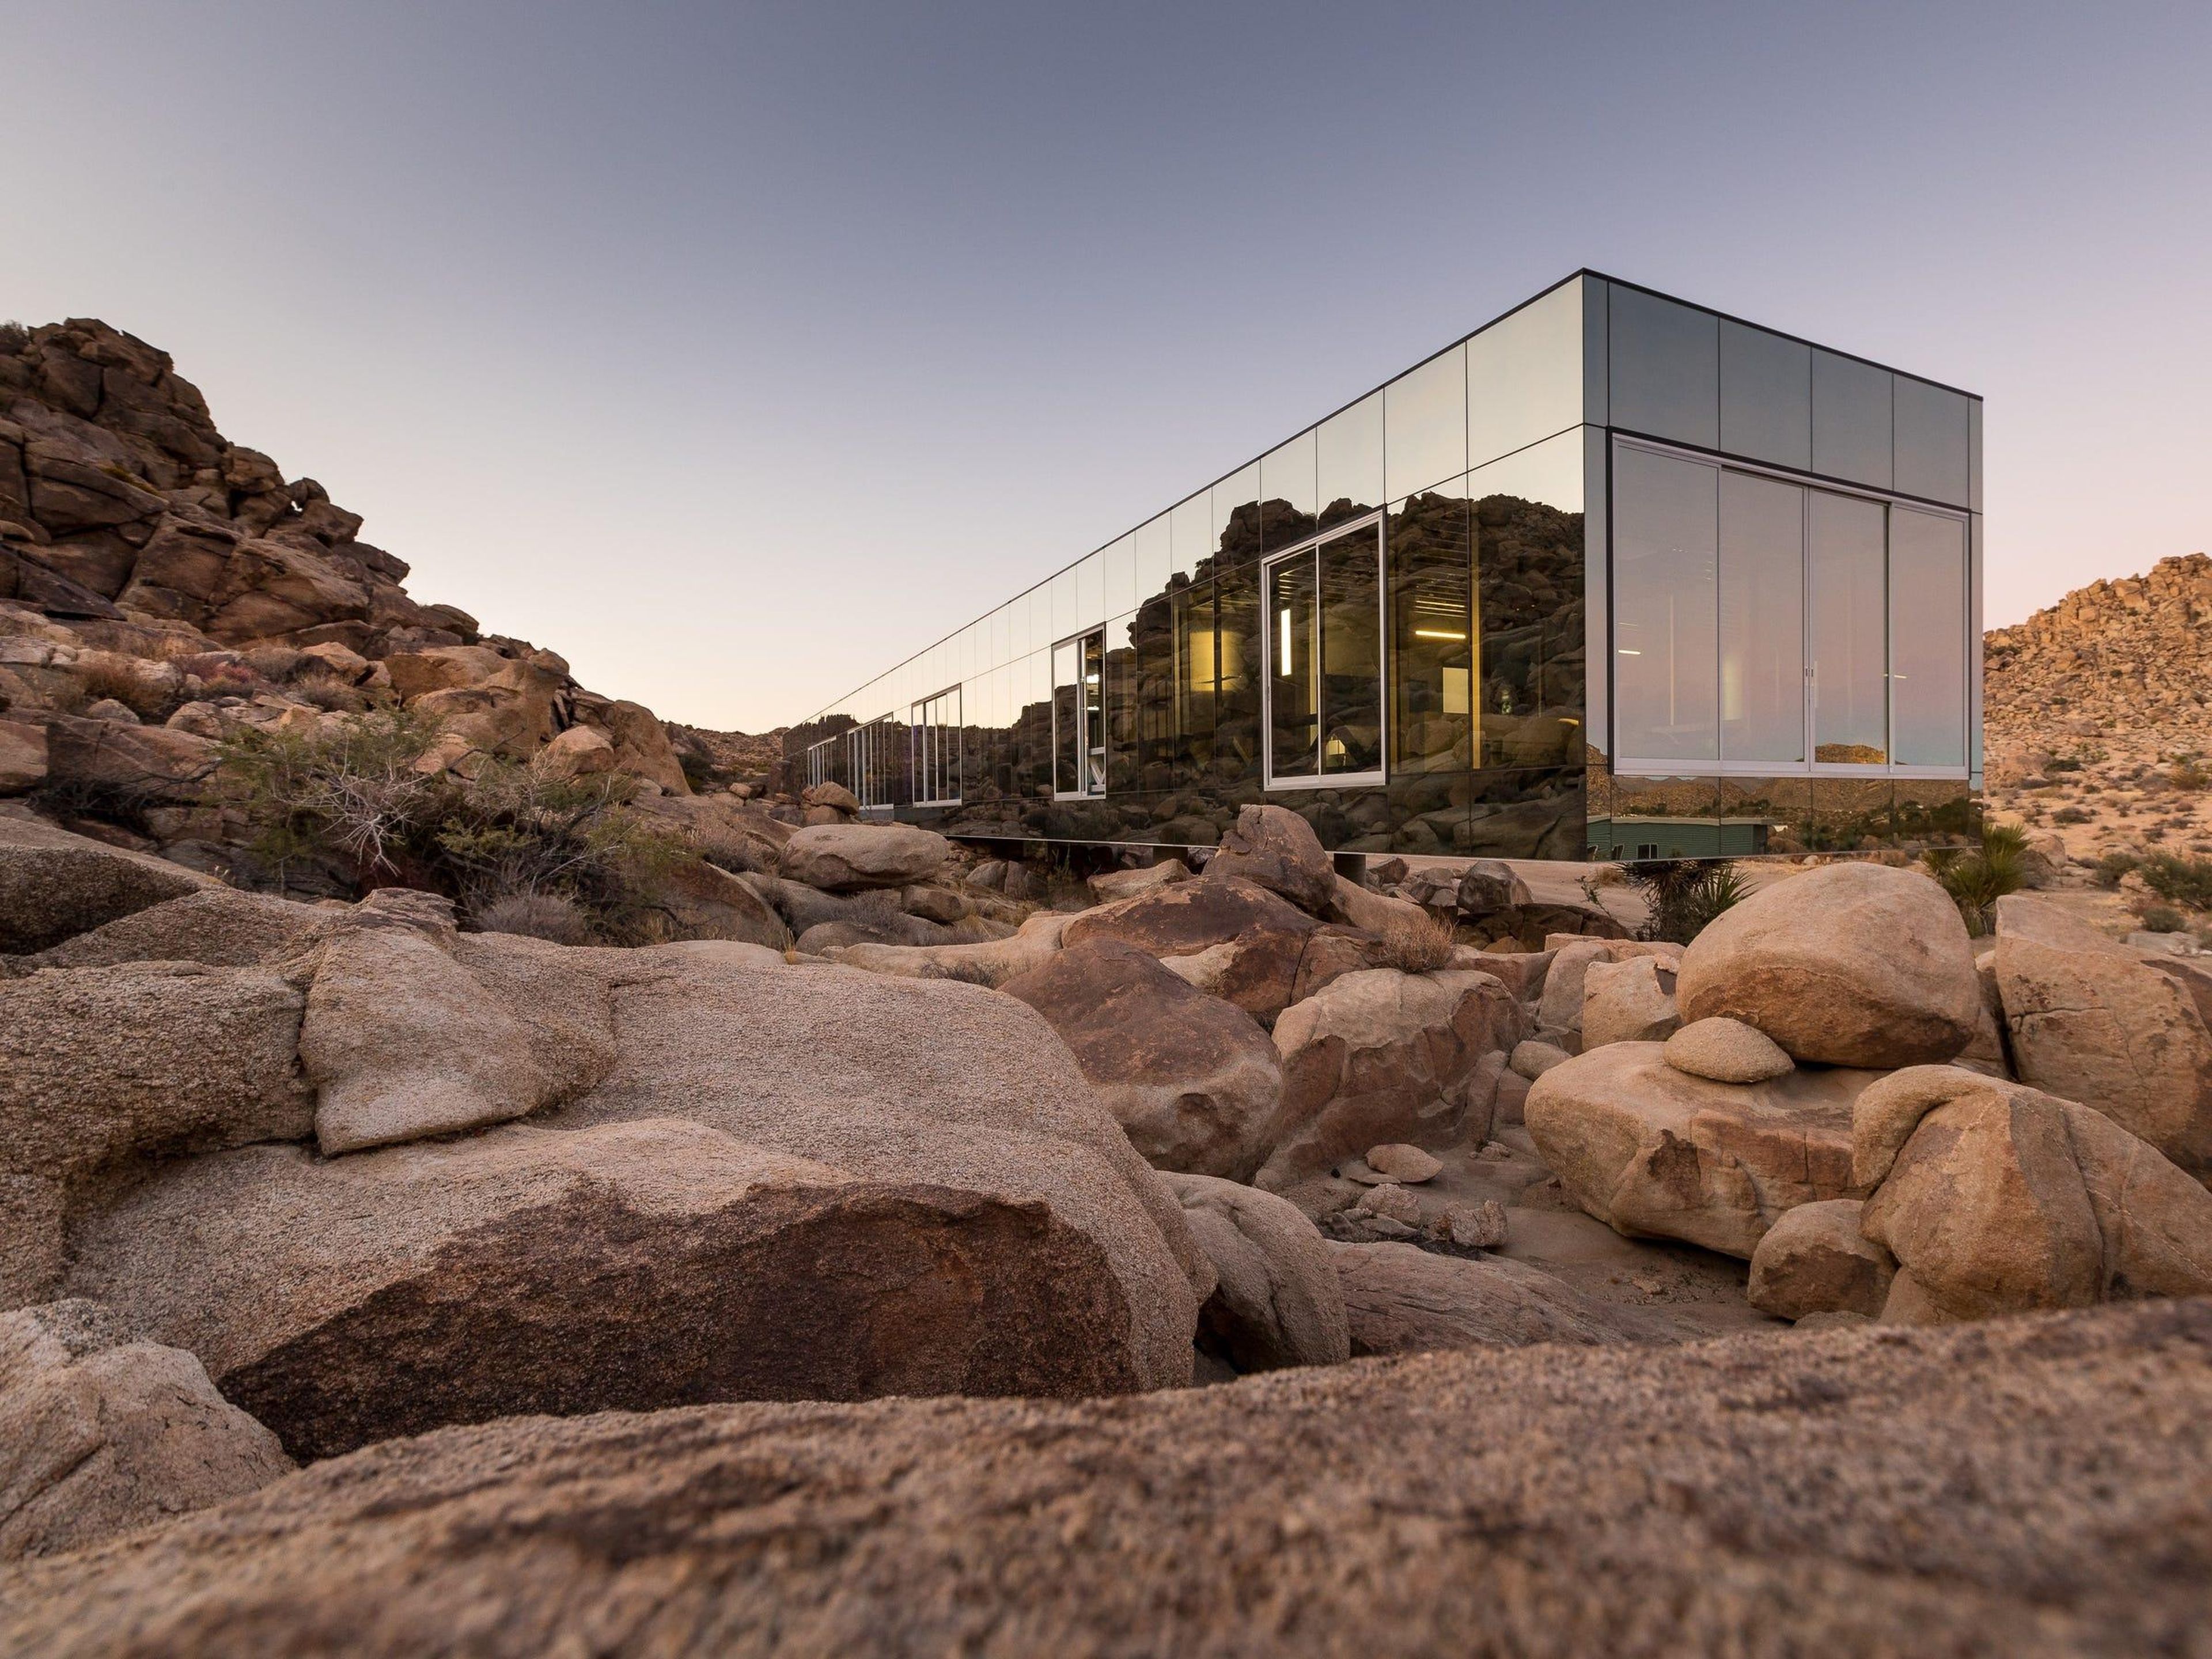 Located on 90 private acres bordering Joshua Tree National Park, it blends in with the surrounding desert thanks to its mirrored glass exterior.